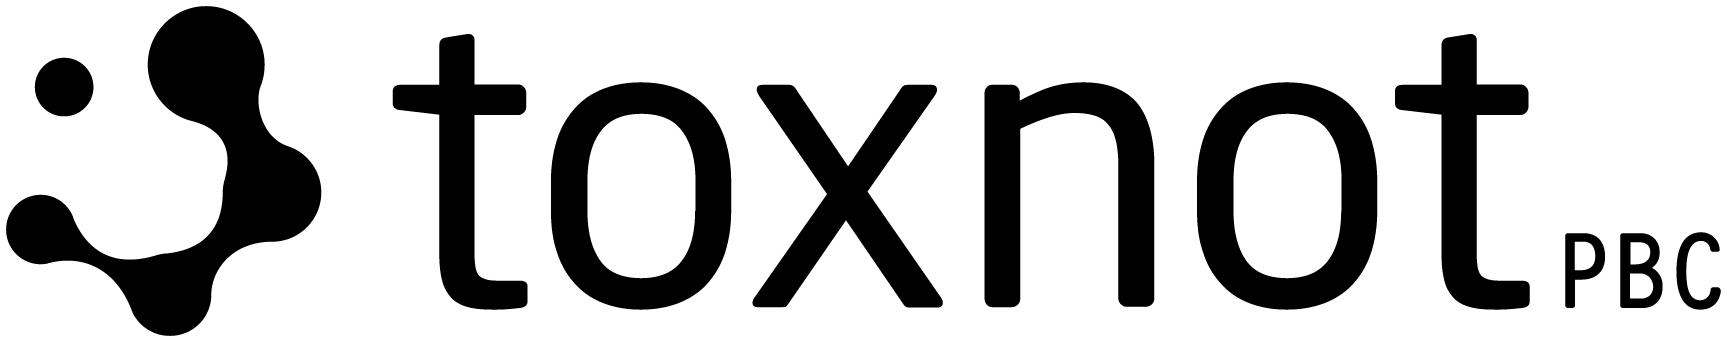 toxnot.com is a platform for chemical management and hazard assessment. toxnot allows brands, customers and suppliers to collaborate on chemical transparency both through an open exchange of data and by crowdfunding new chemical assessments.